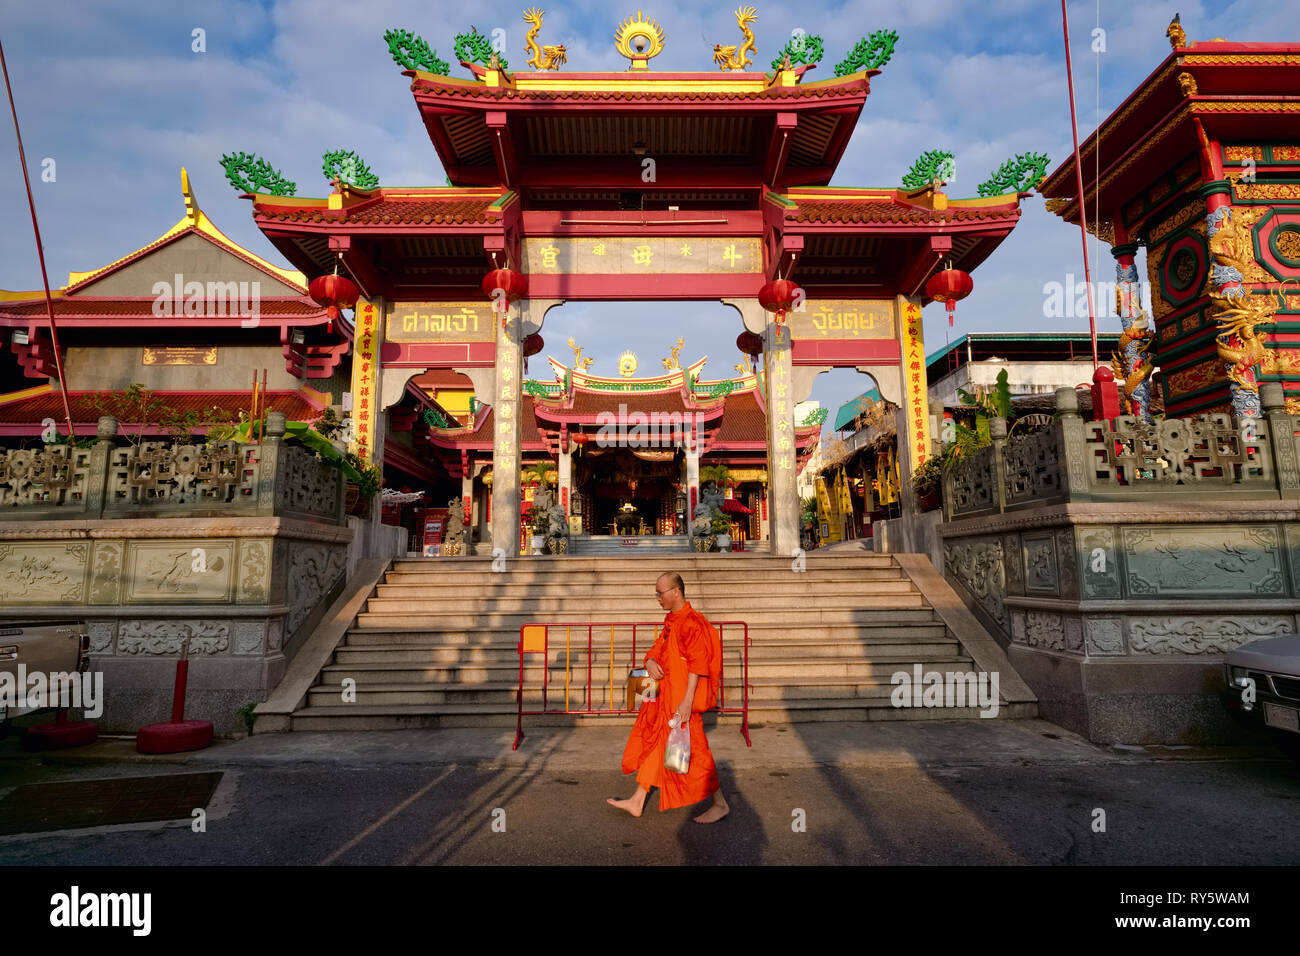 A Buddhist monk in Phuket Town, Thailand, during his morning alms' round passing the Taoist Jui Tui Temple Stock Photo